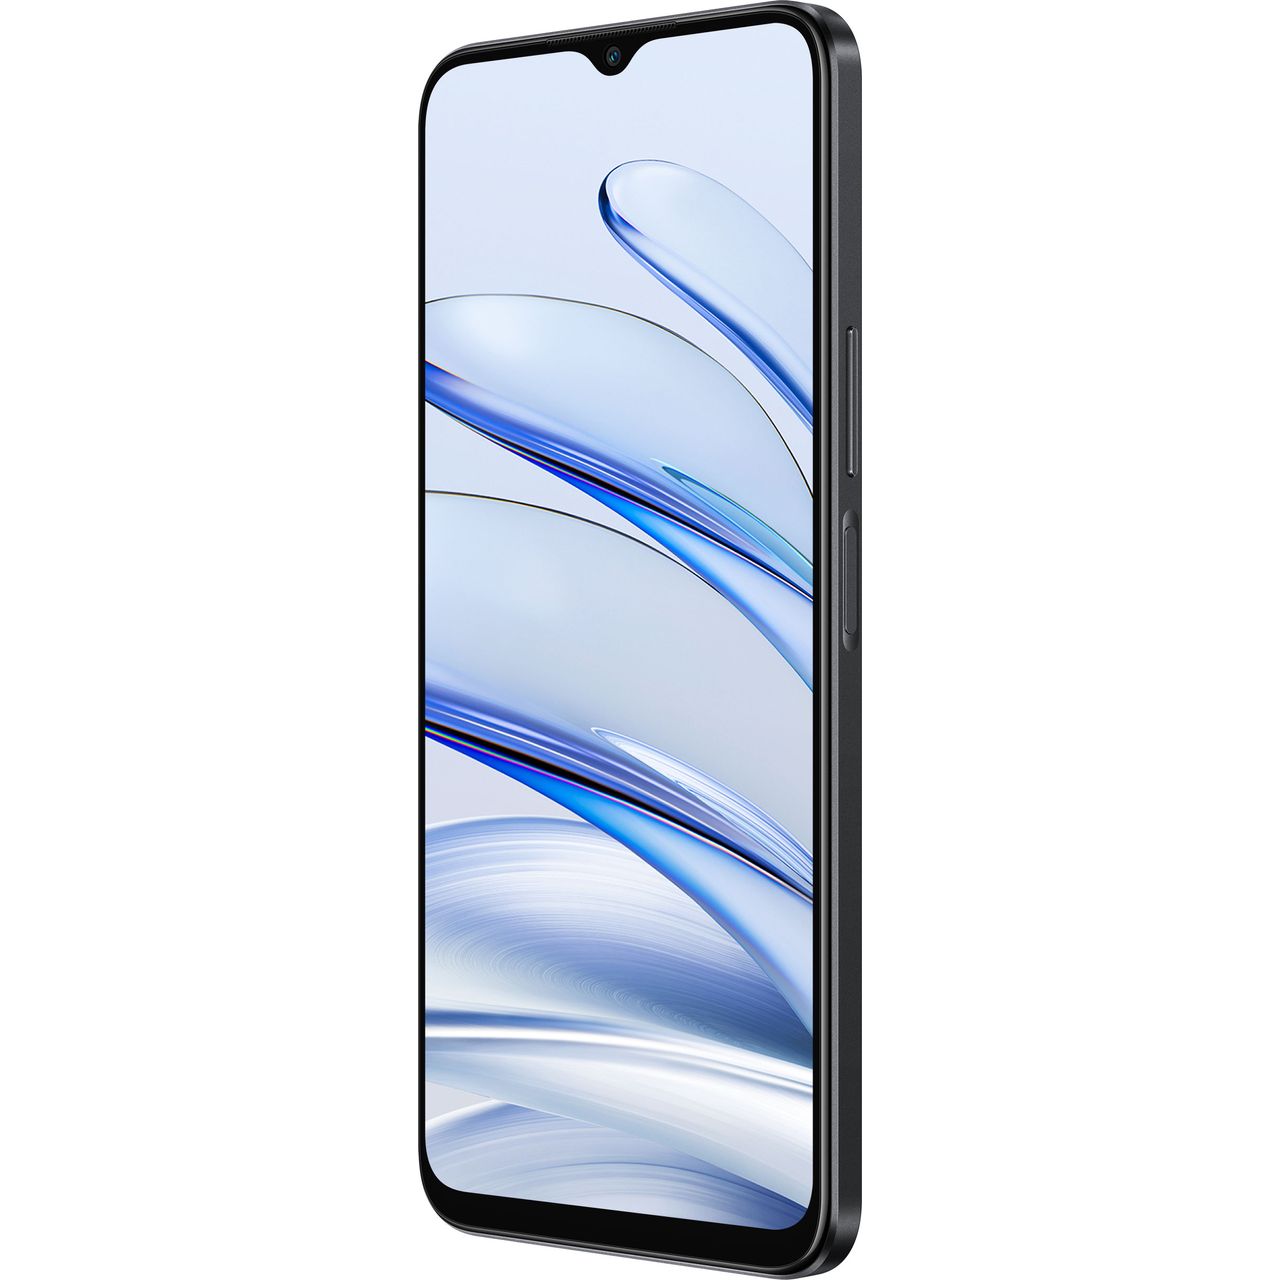 New Honor 70 Lite 5G smartphone launched in UK - Telecompaper